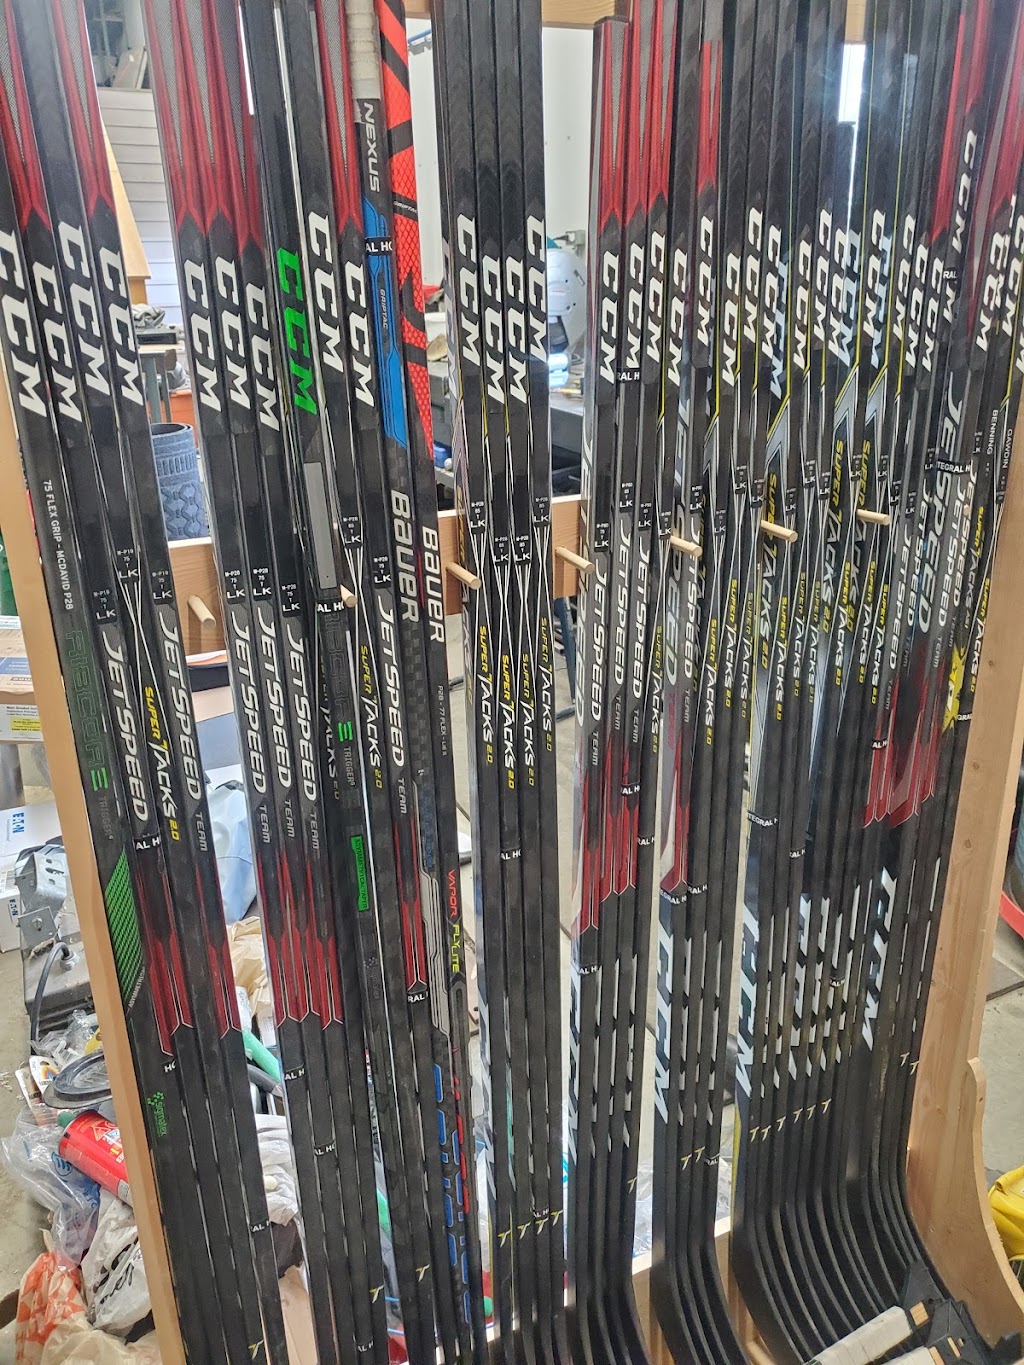 Integral Hockey stick repair south central AB | store | Box 280, 28462, AB-587, Bowden, AB T0M 0K0, Canada | 4033506346 OR +1 403-350-6346